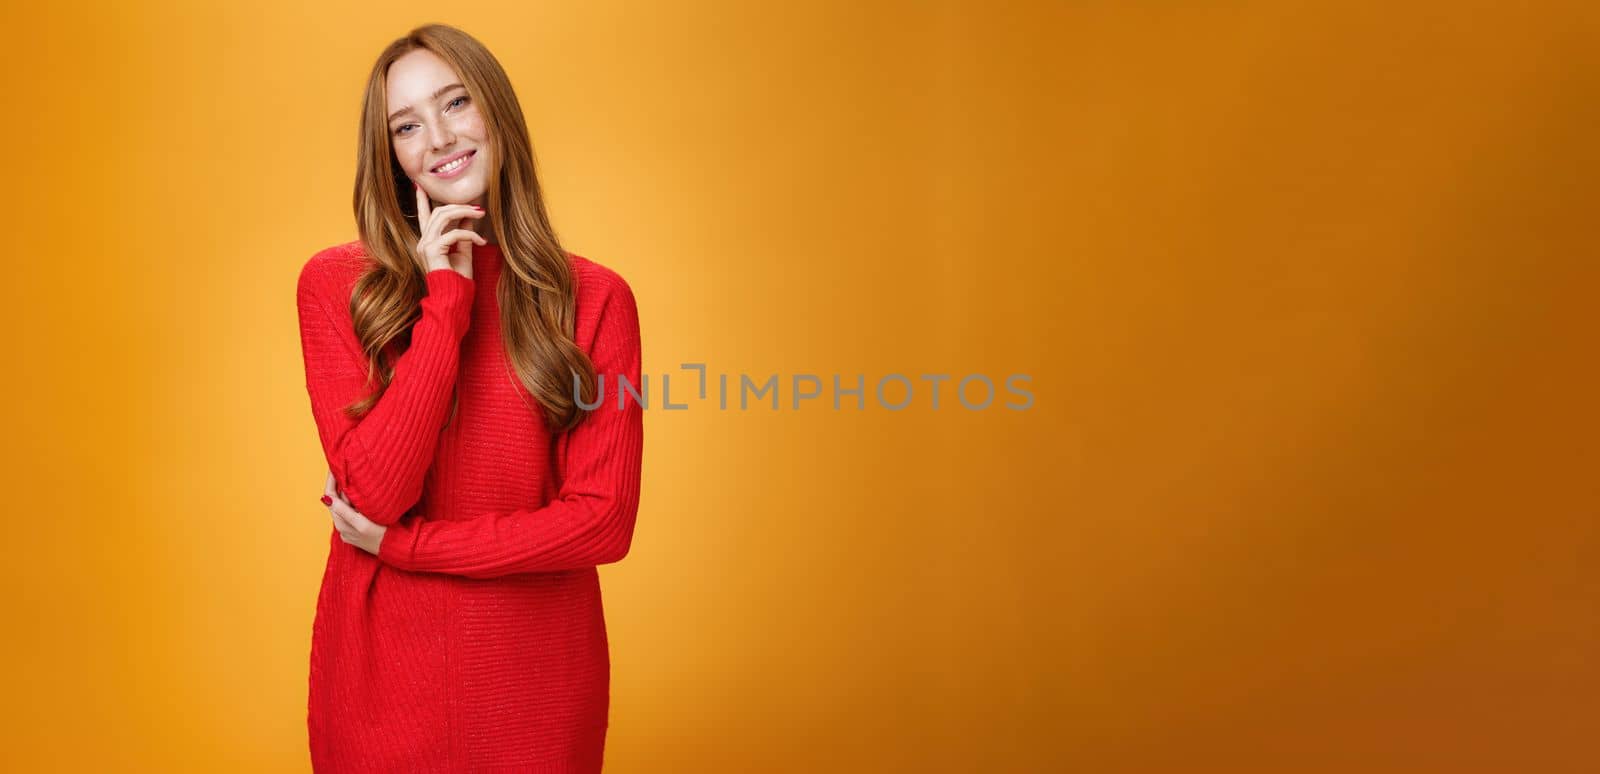 Sweet and tender redhead woman with cute freckles in red knitted dress tilting head touching face with fingers and smiling delighted and loving a camera over orange background. Copy space